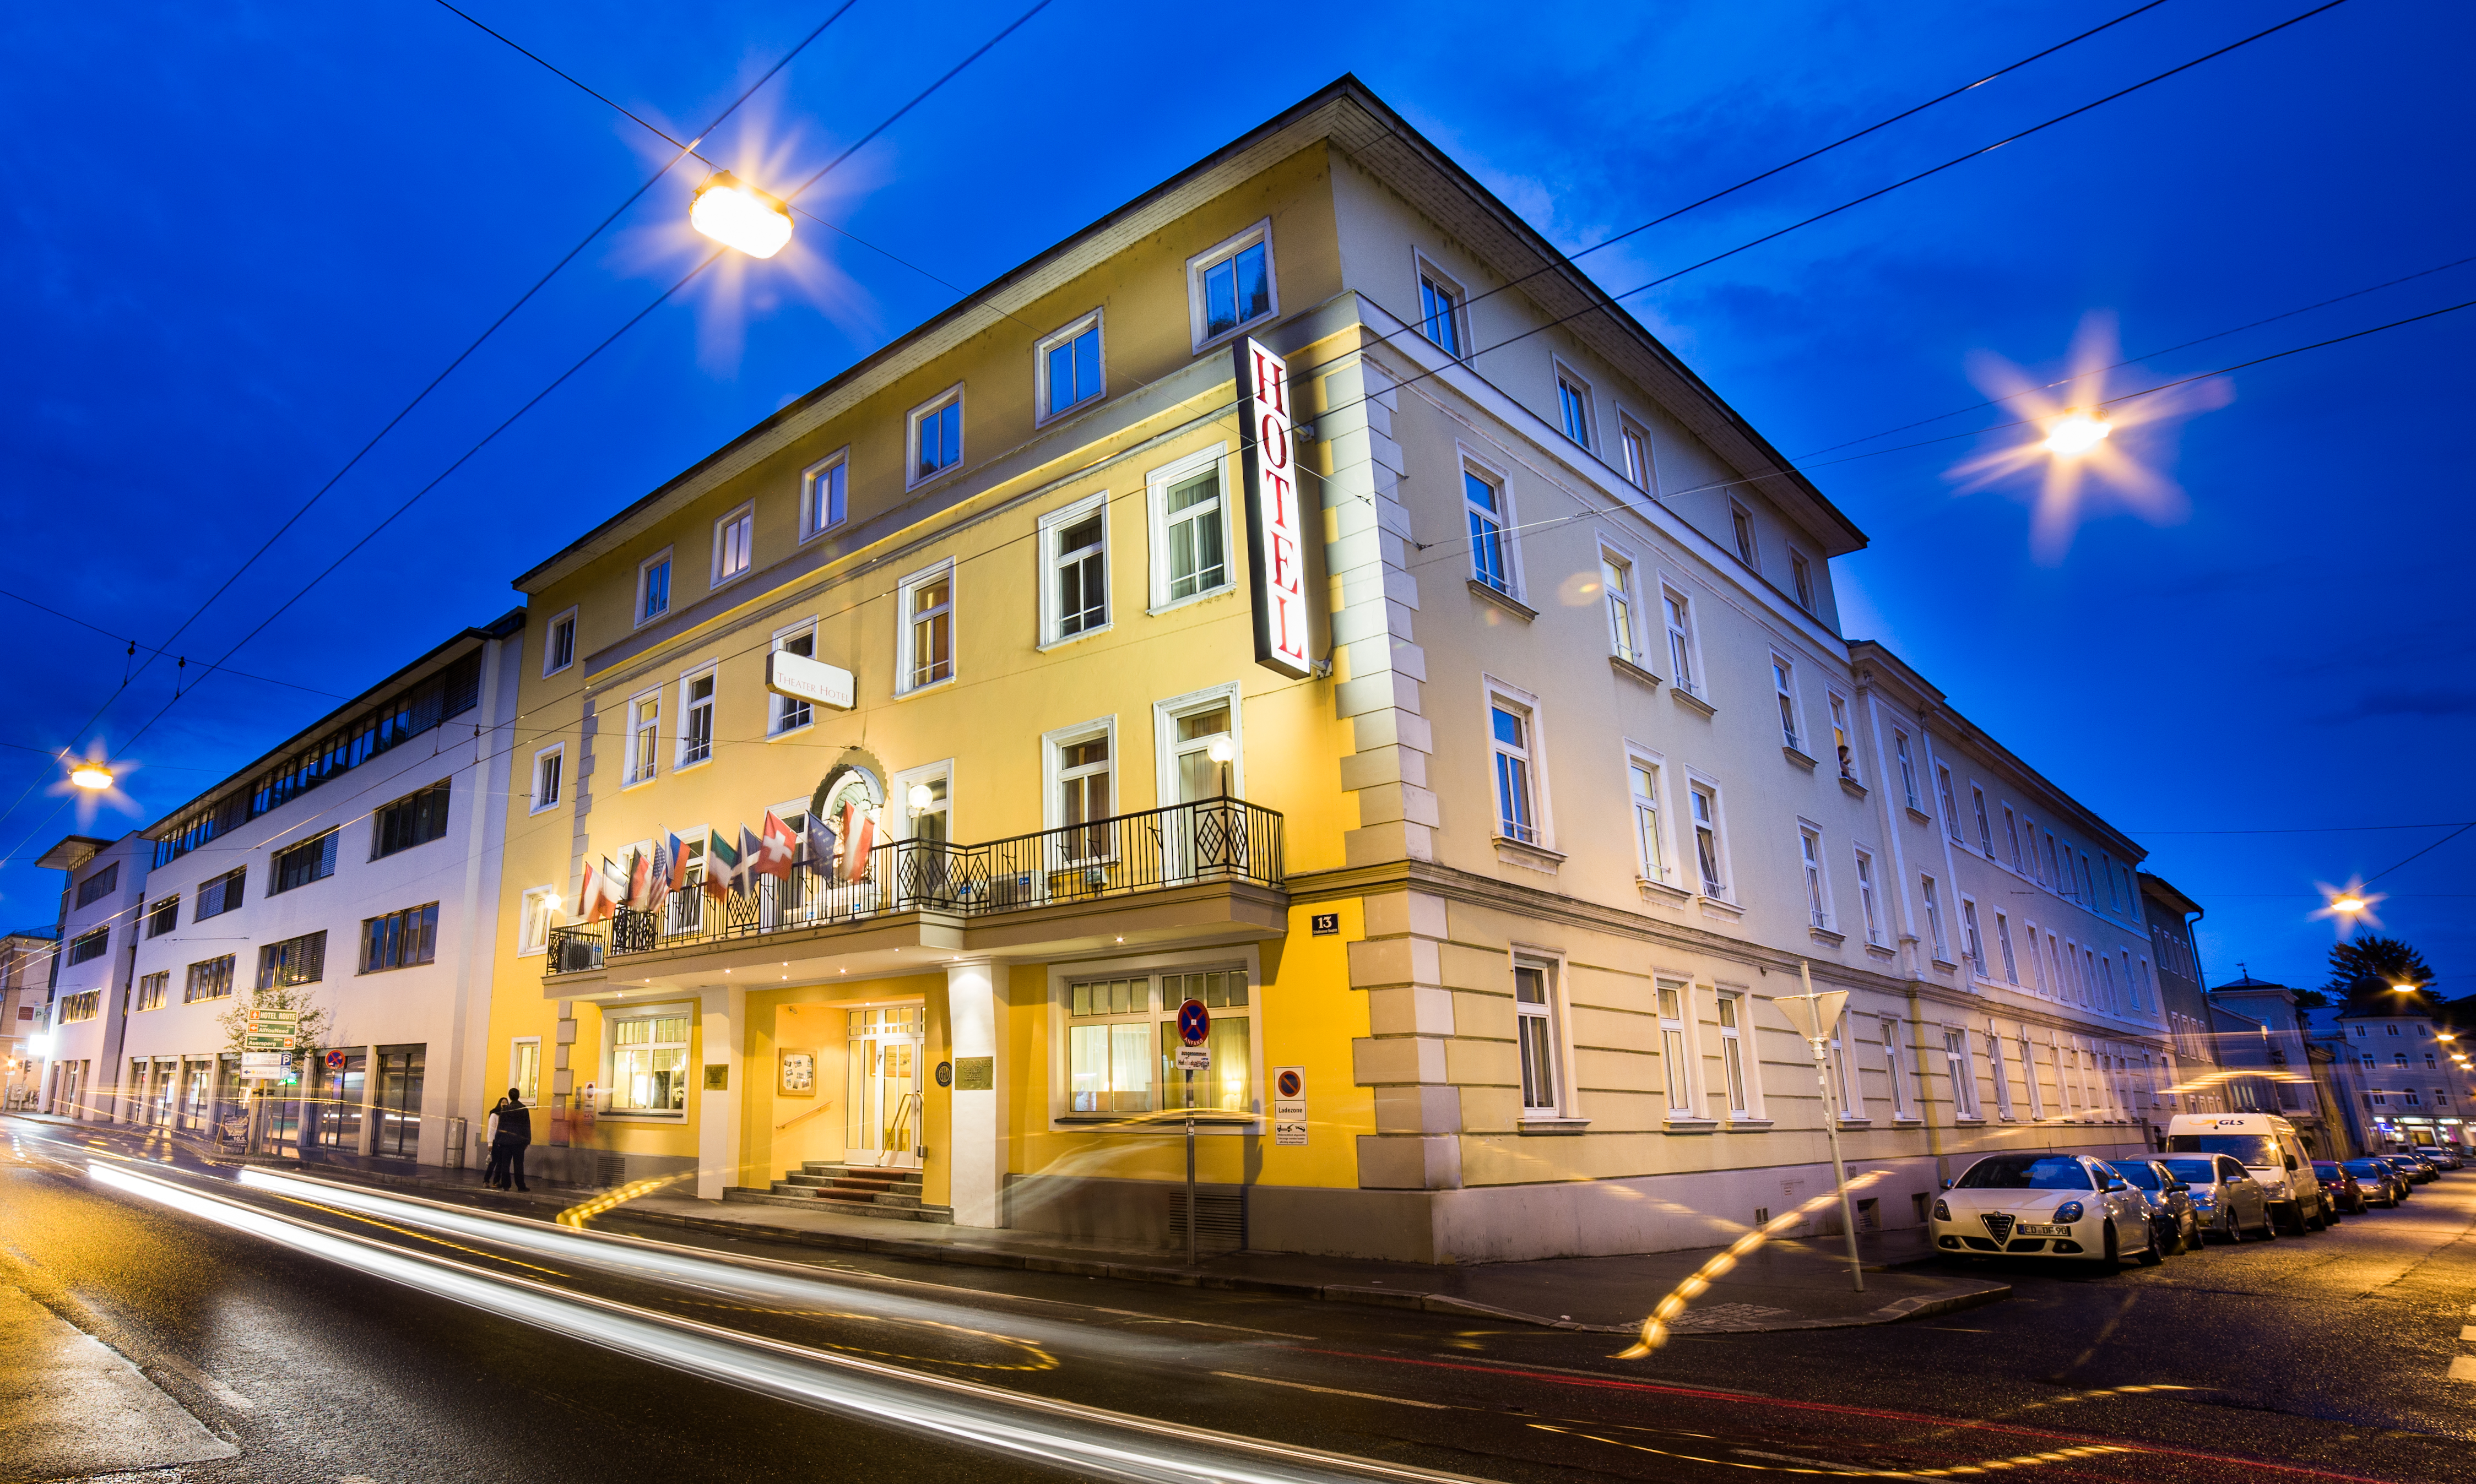 Goldenes Theater Hotel <br/>94.00 ew <br/> <a href='http://vakantieoplossing.nl/outpage/?id=b33264291c6b2cdf7563273d256c56d5' target='_blank'>View Details</a>